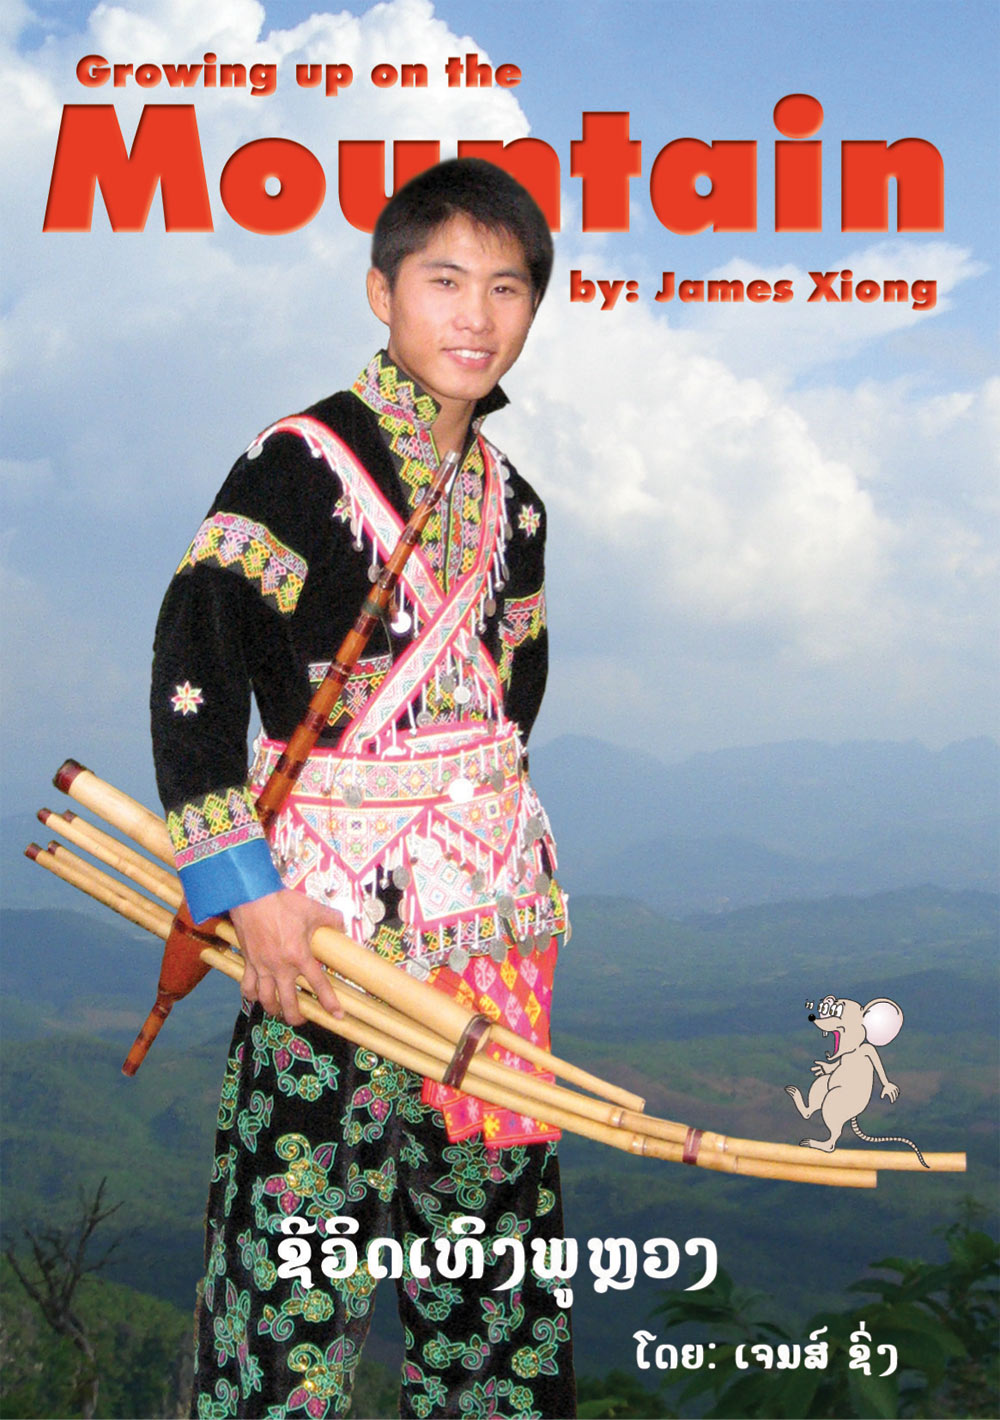 Growing Up on the Mountain large book cover, published in English